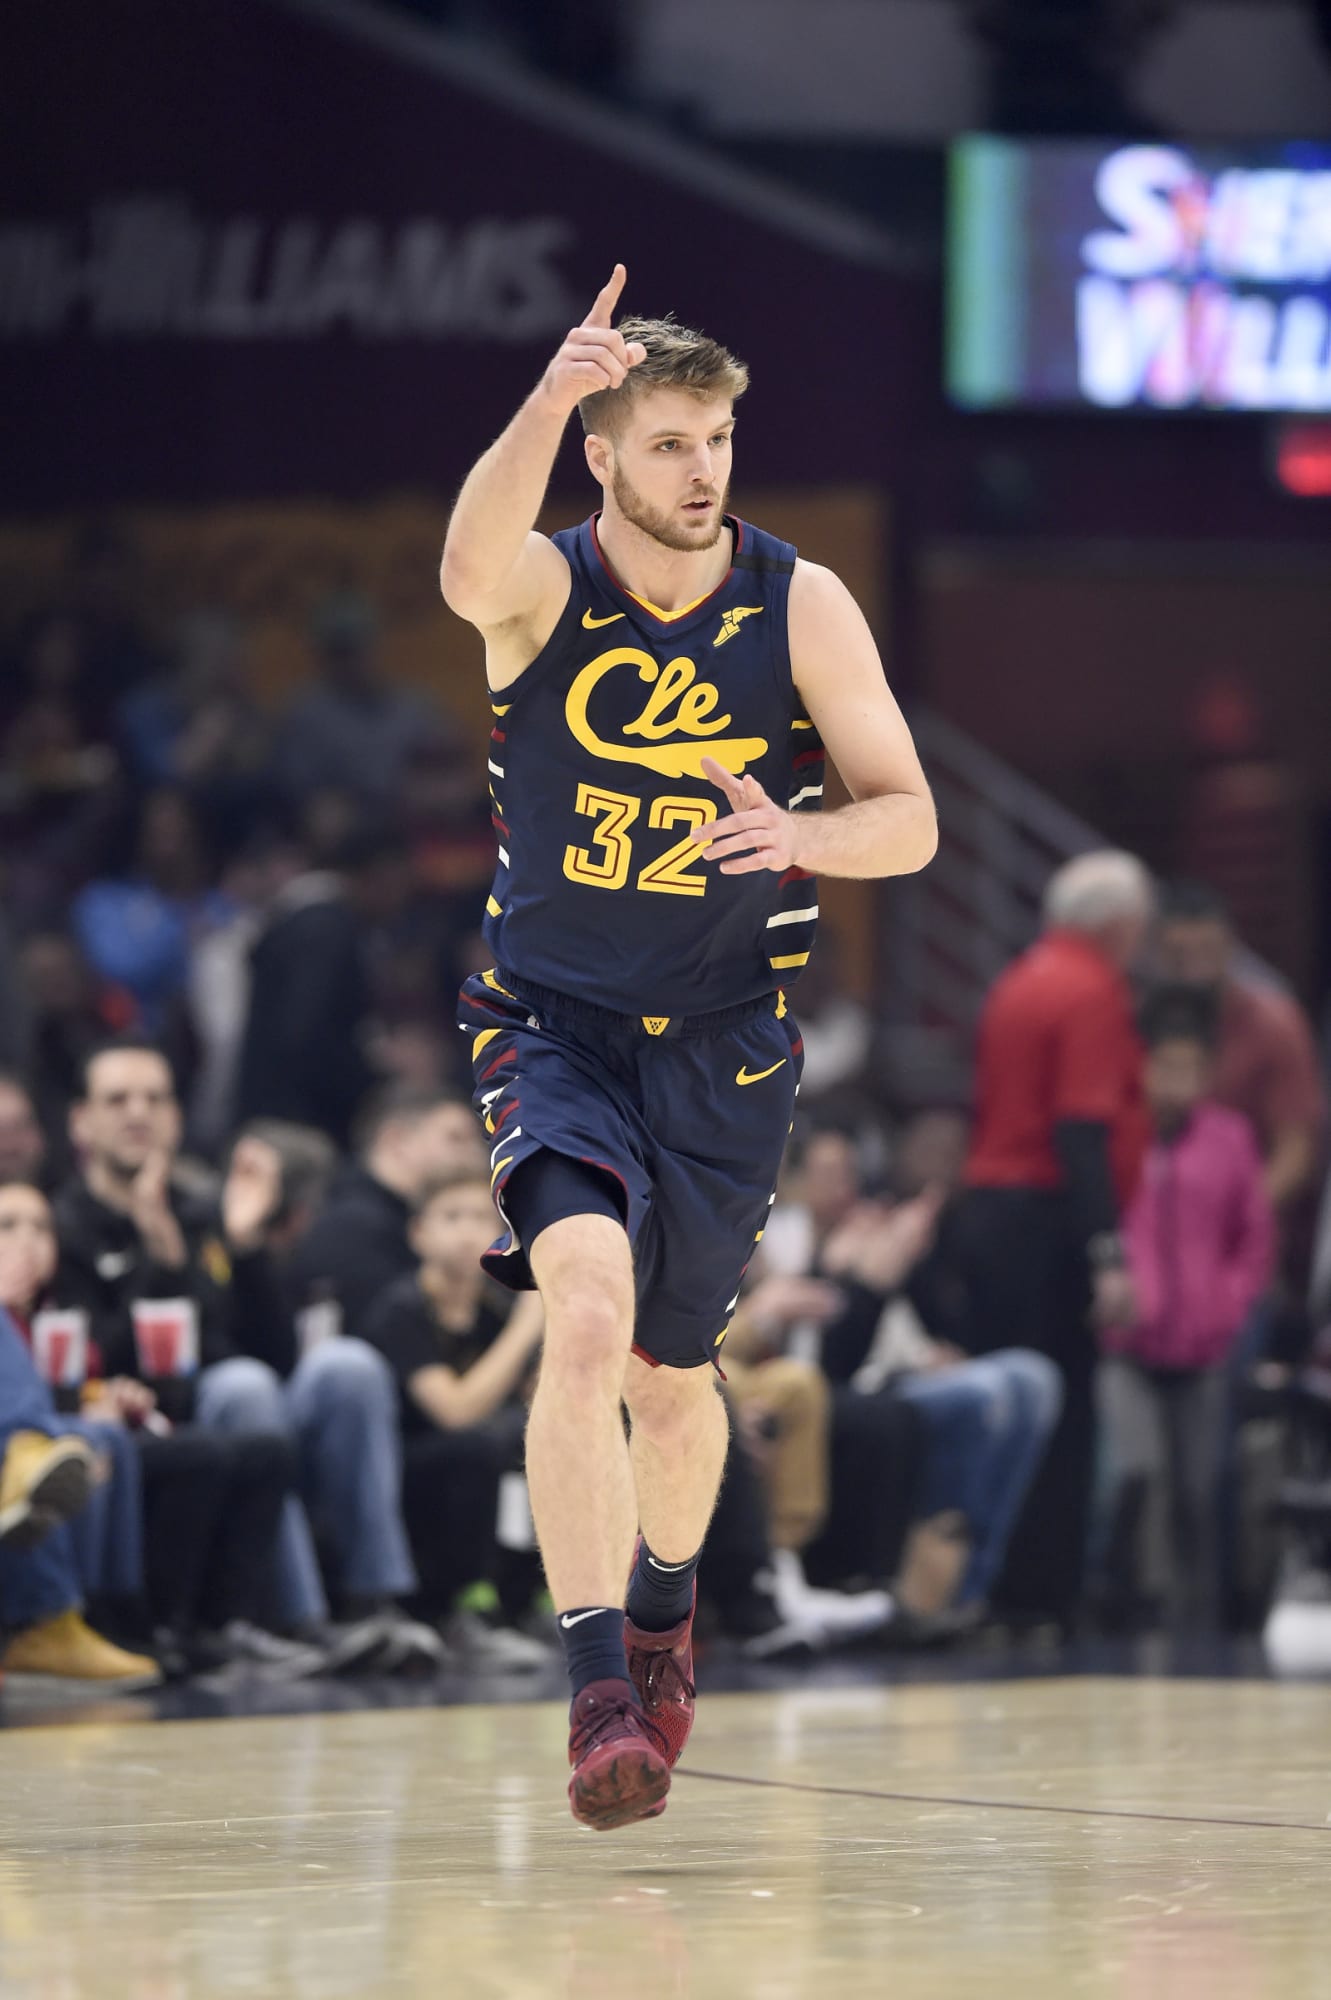 Cleveland Cavaliers 1 key goal for Dean Wade for 202021, if he's around